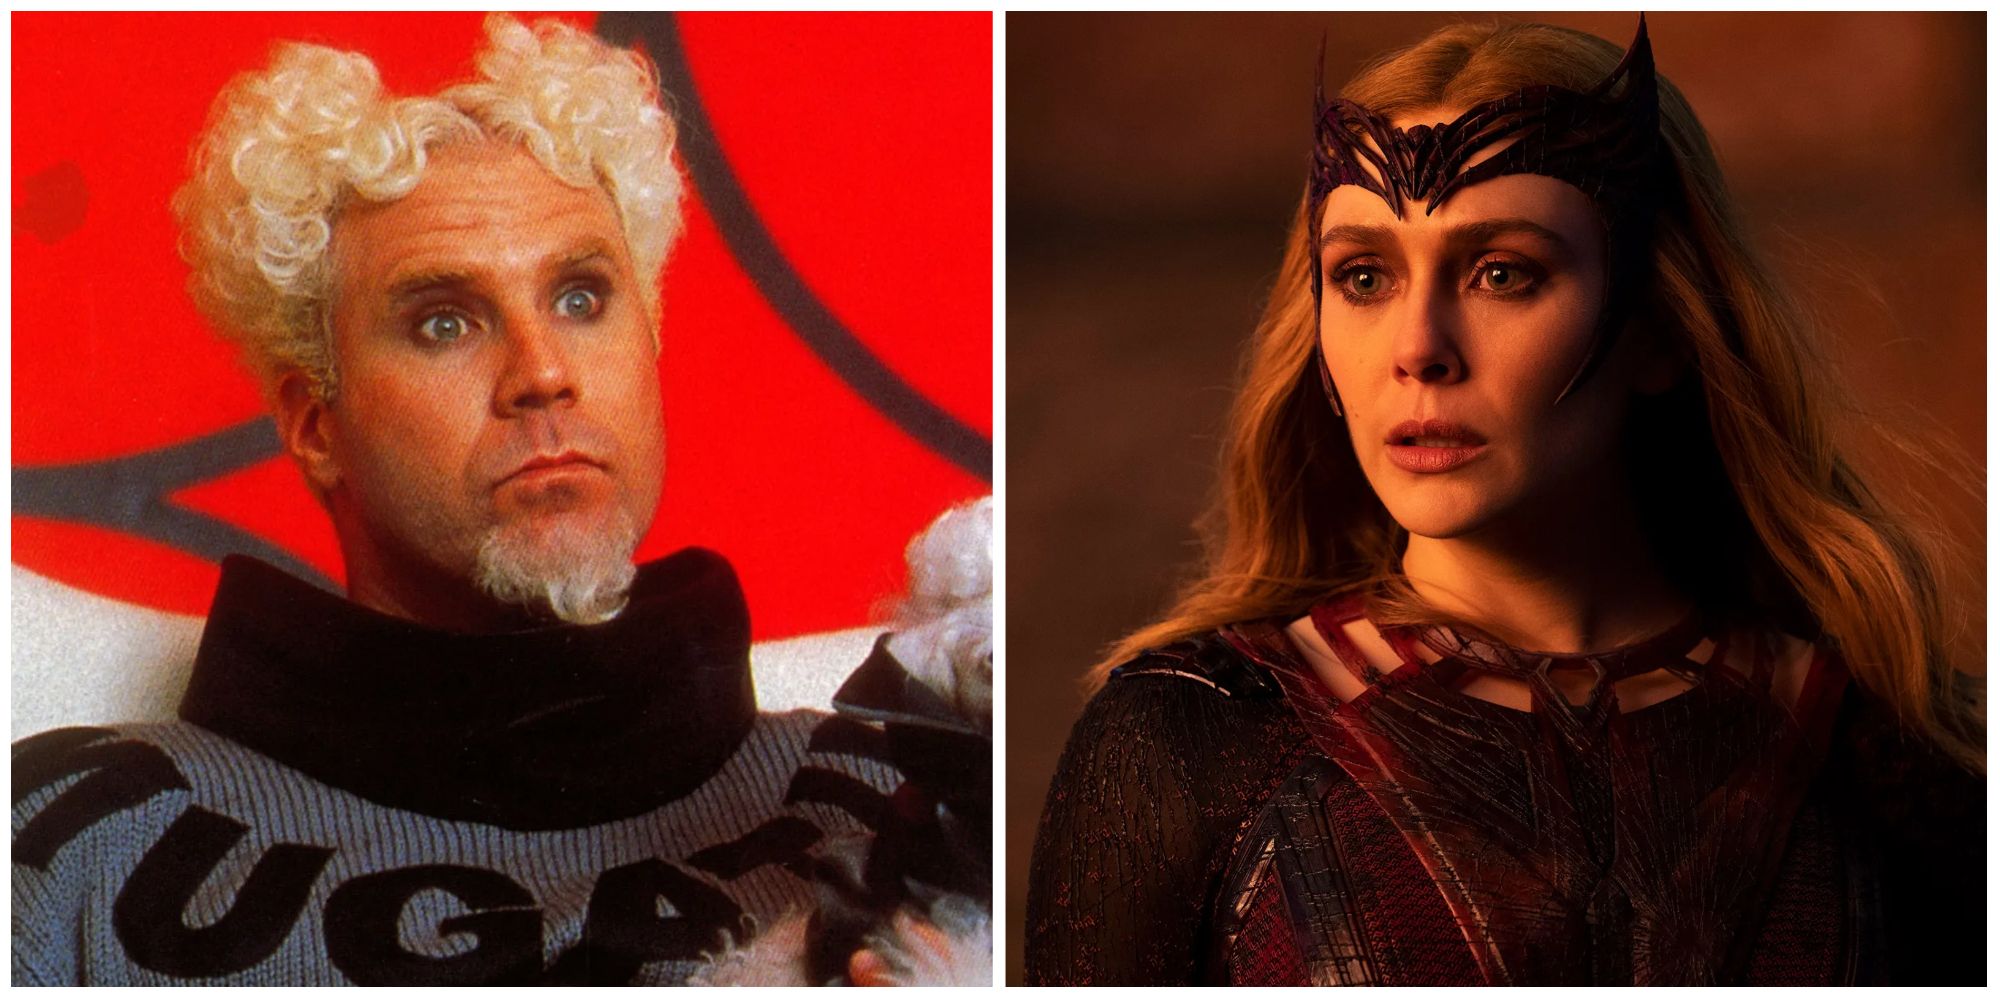 Will Ferrell in Zoolander and Elizabeth Olsen in Doctor Strange in the Multiverse of Madness